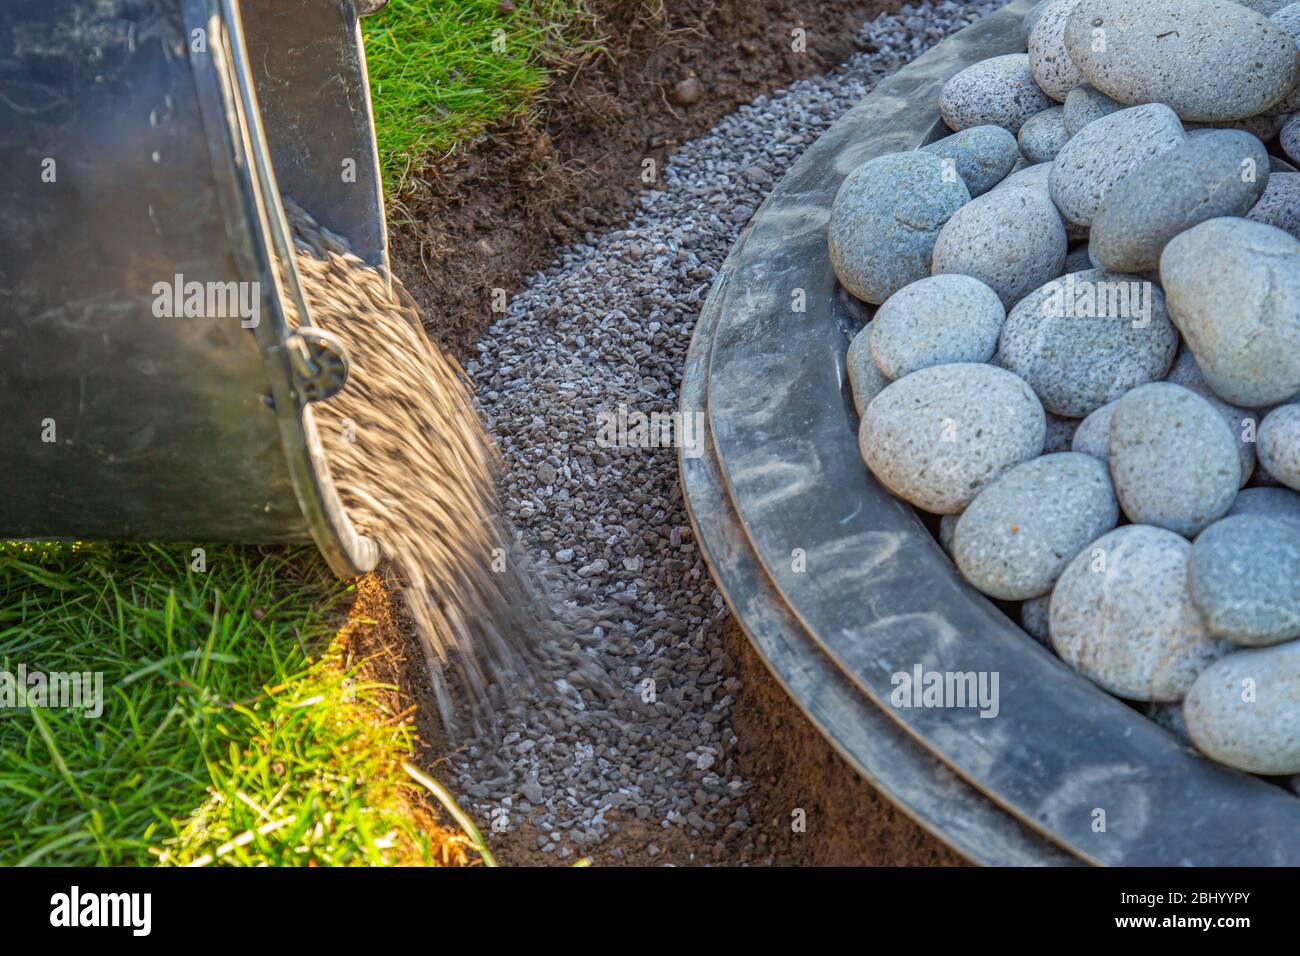 gritting material filled into the curb of a garden fountain Stock Photo